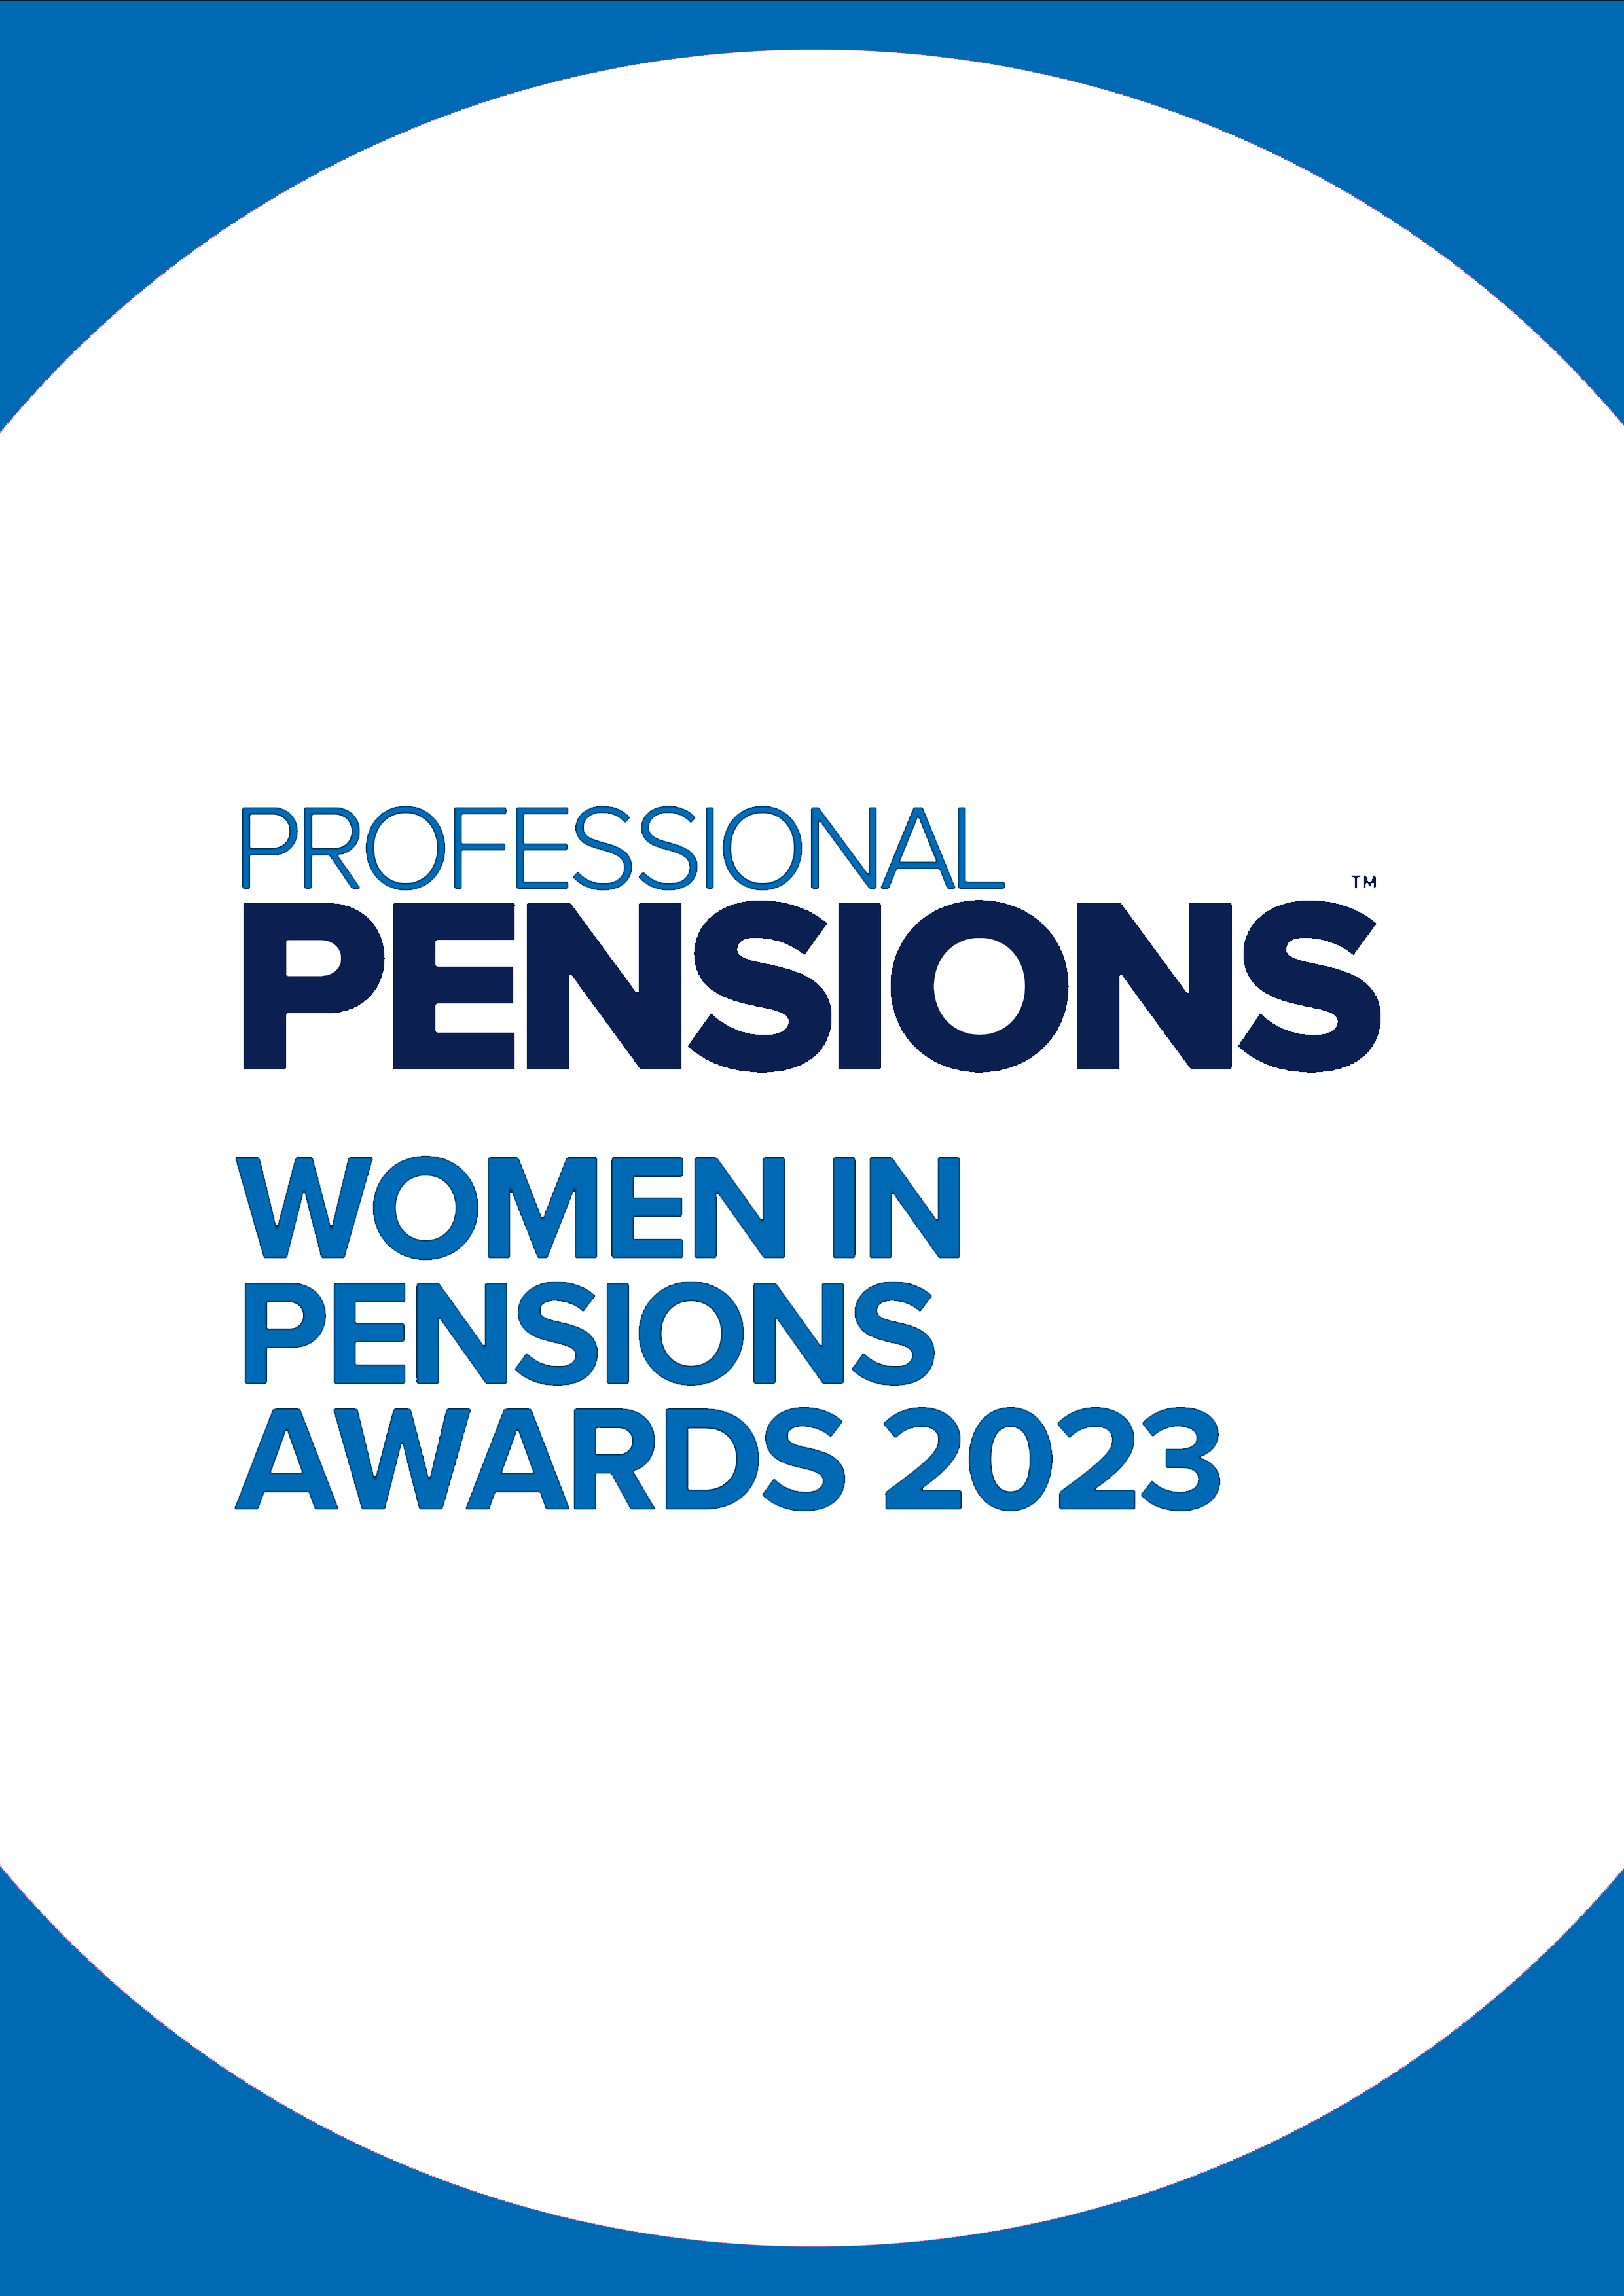 Shortlisted for Women in Pensions